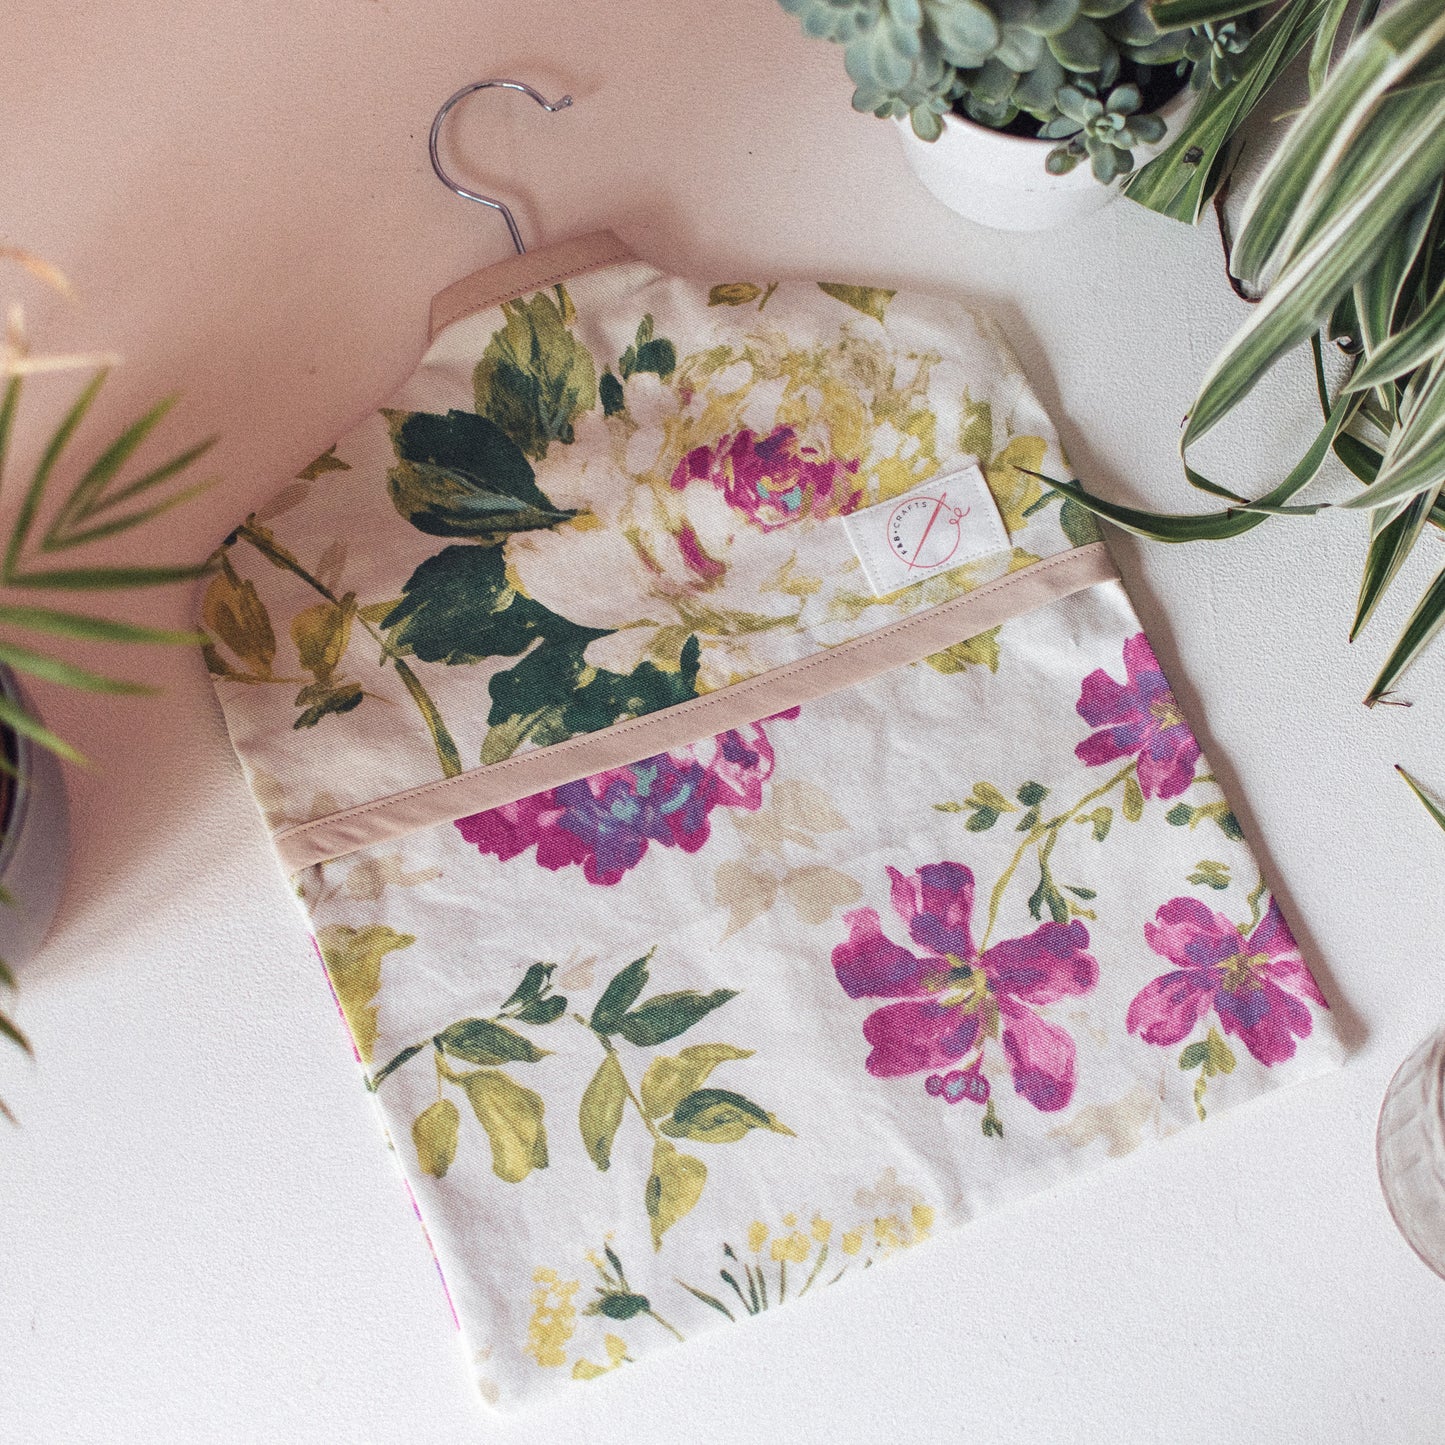 F&B Crafts - Laundry Accessories Handmade with Floral Print Fabric